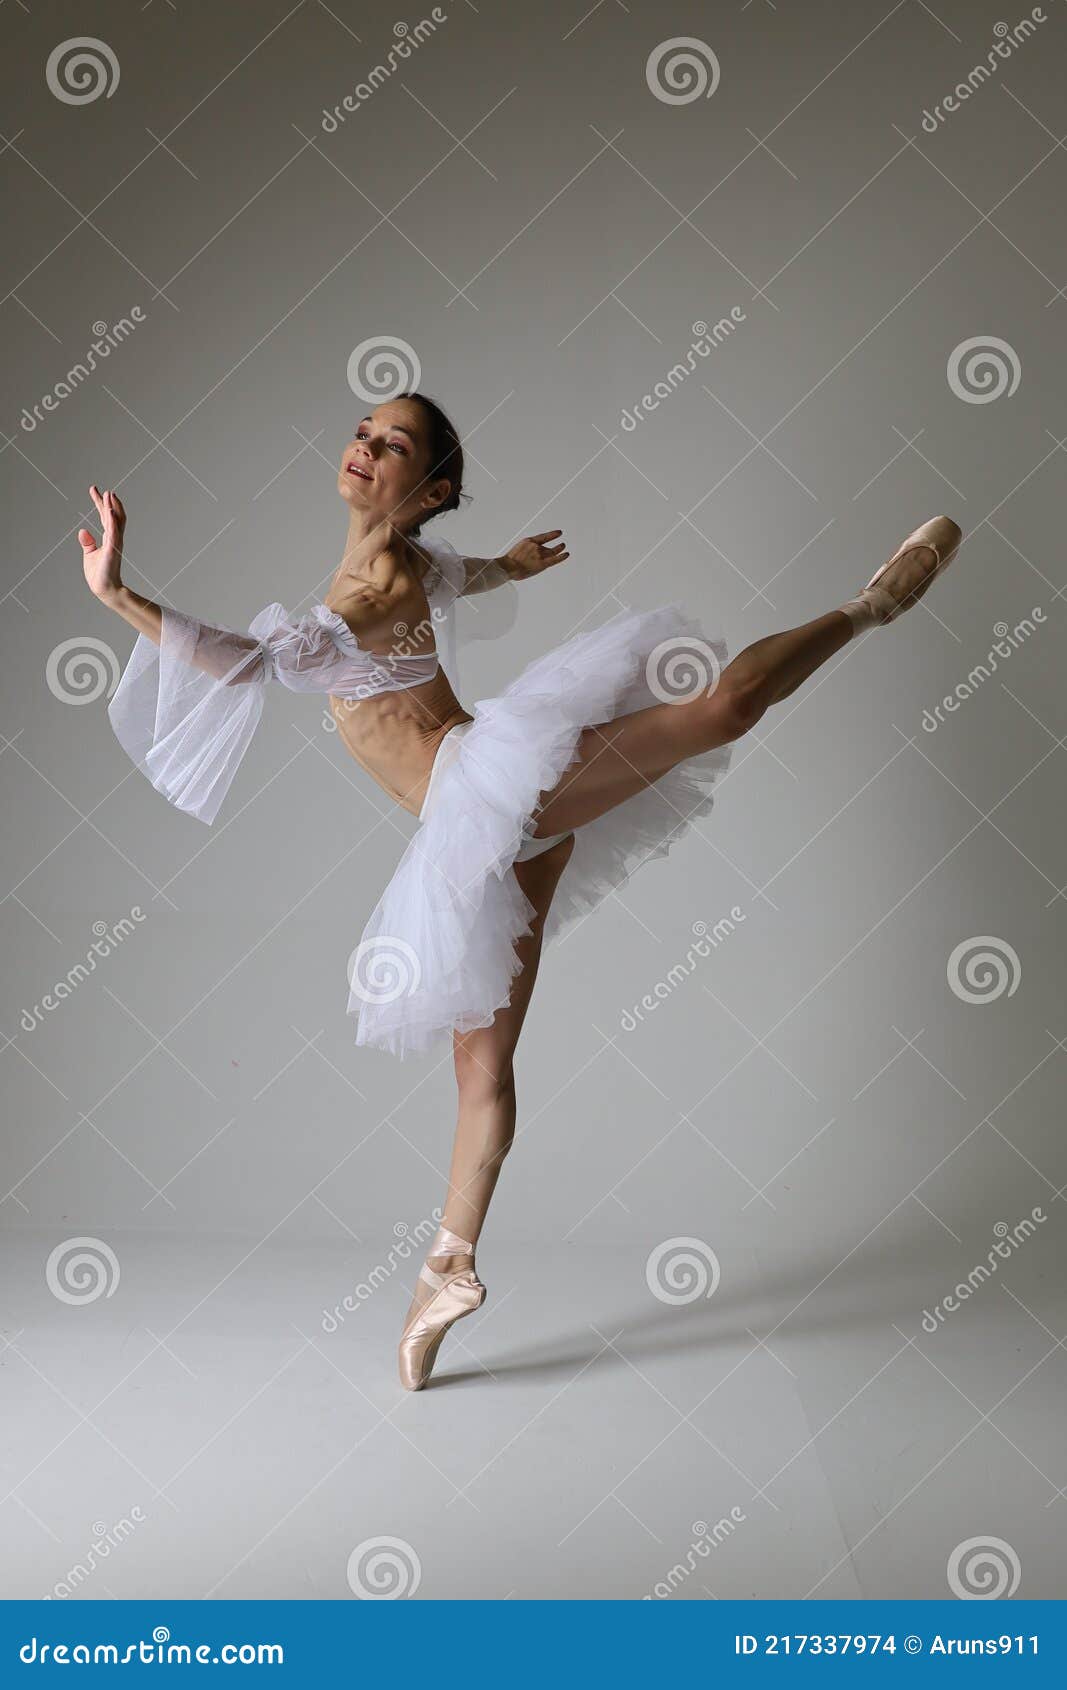 Photoshoot a Posing in a Studio Stock Photo - Image of indoors, room: 217337974